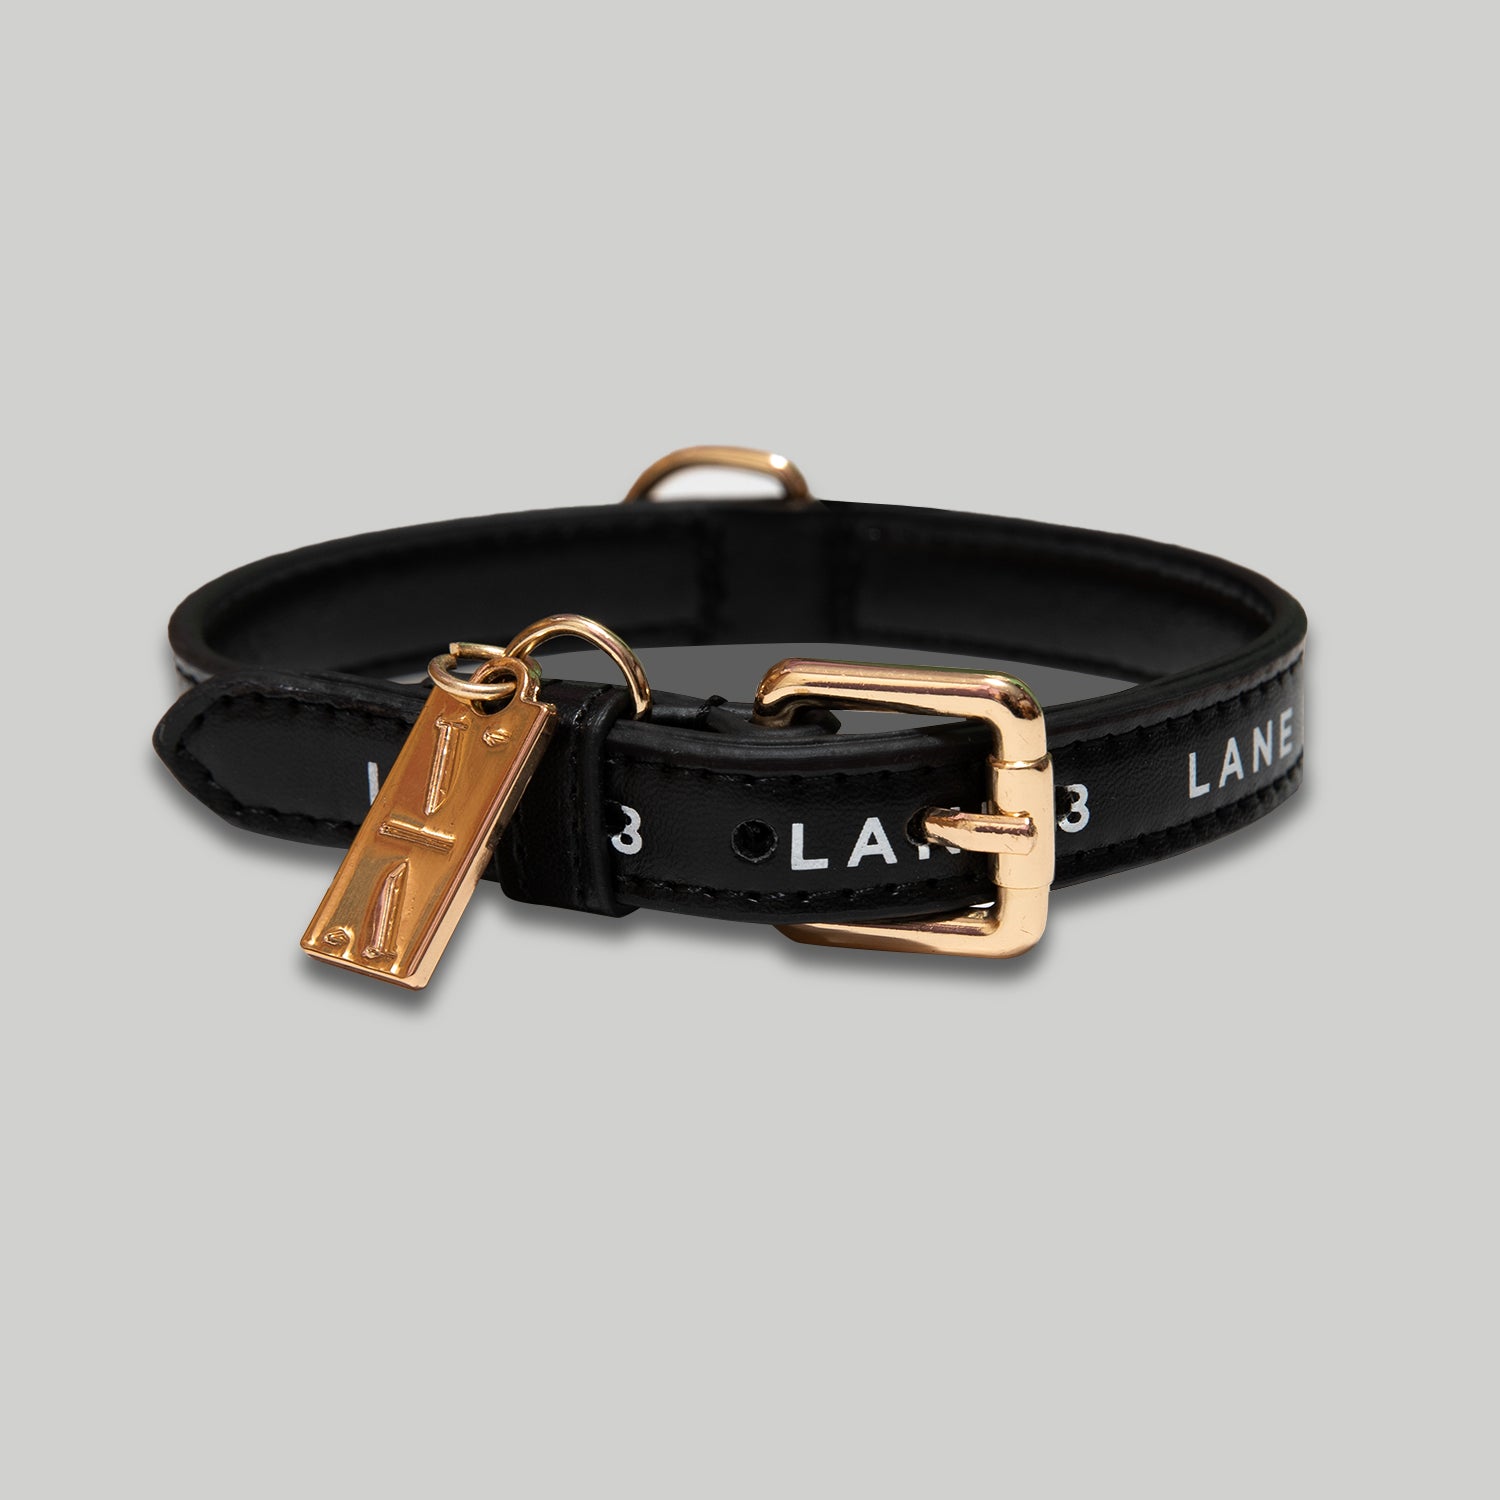 Louis Vuitton Dog Collar and Leash